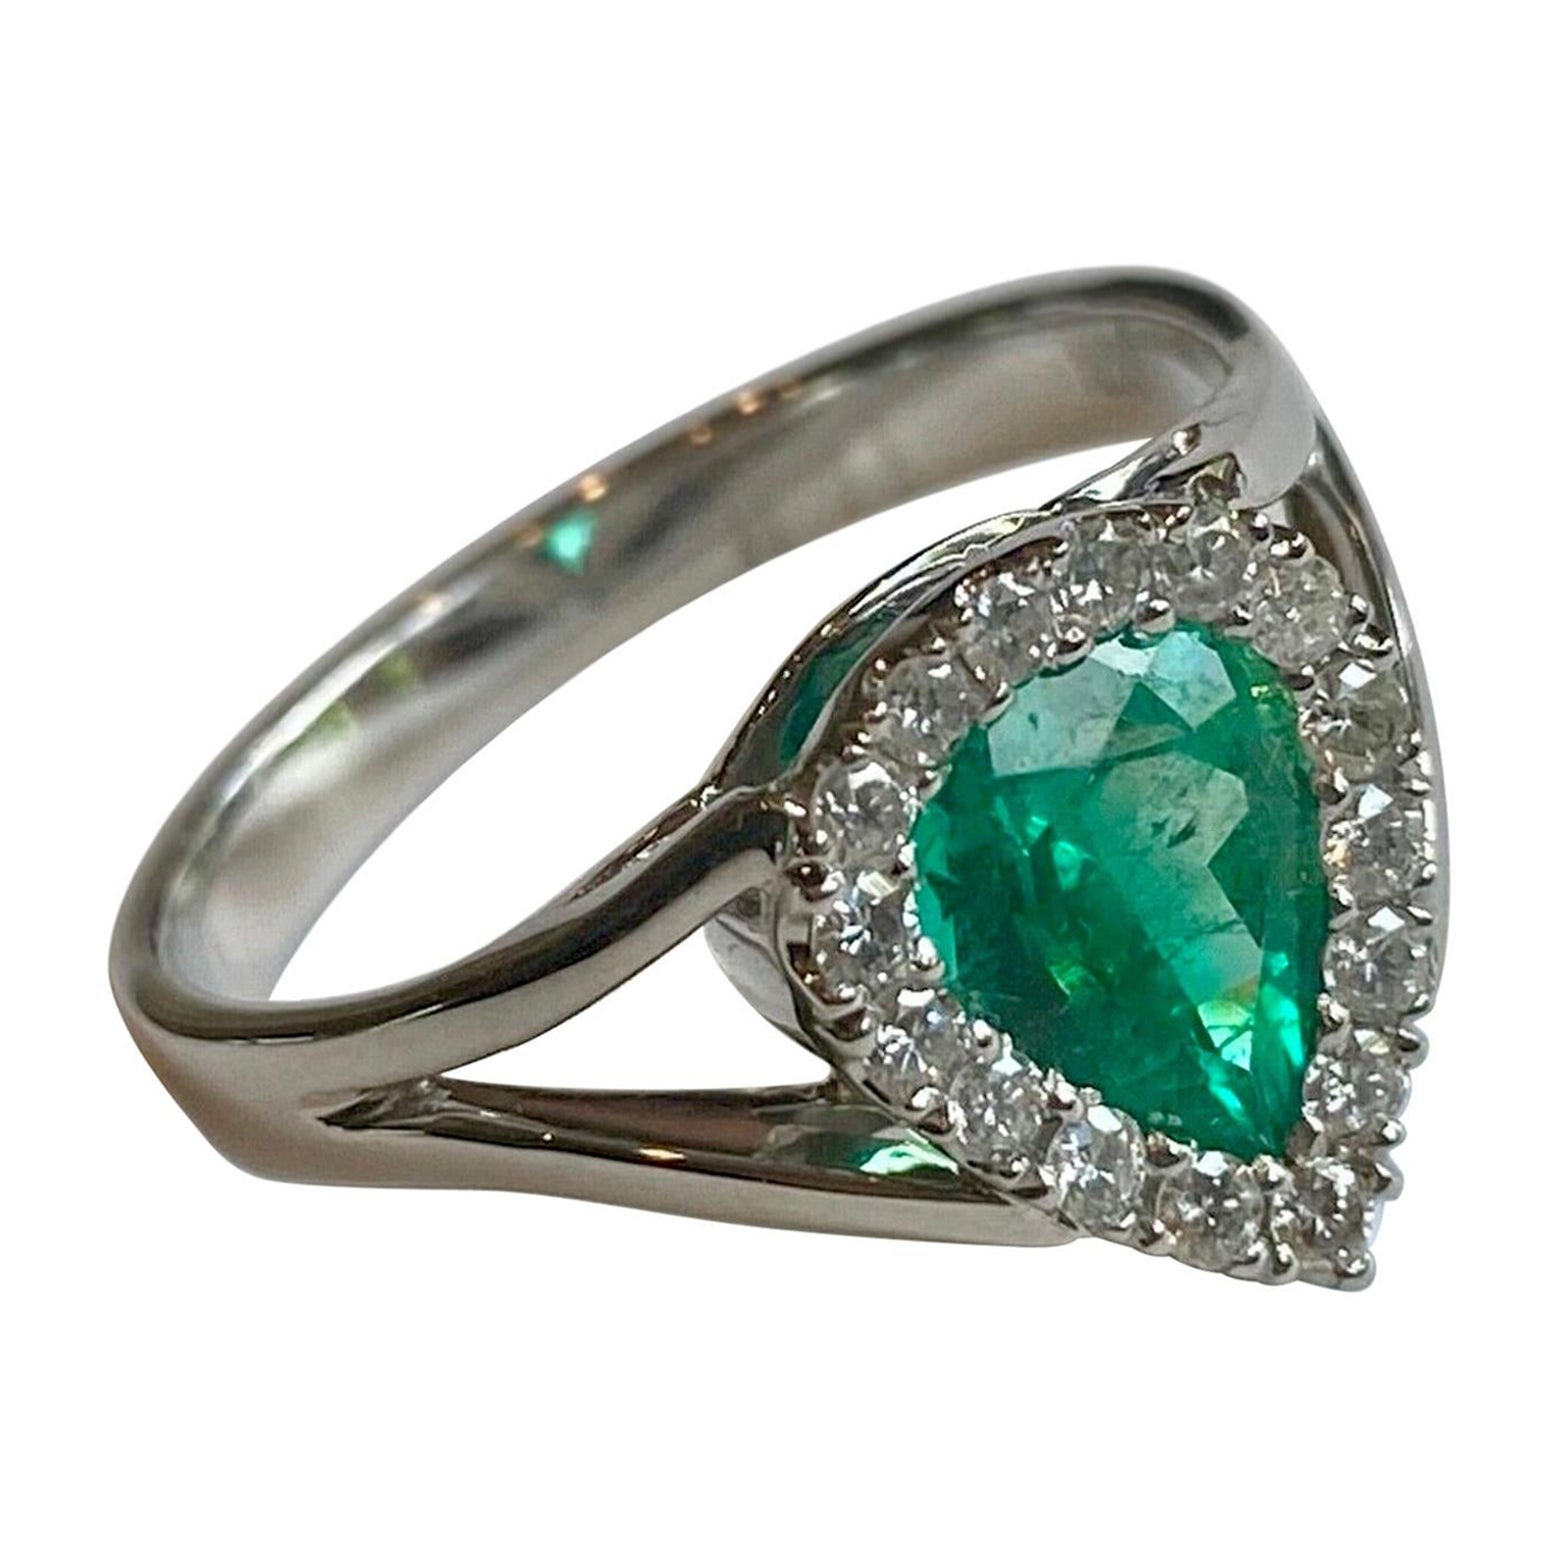 Emeralds Maravellous Stylish Fine AAA Natural Colombian Emerald and Diamond Ring
Colombian emerald 1.50 carats- VS, Vivid Medium Green set with Natural Brilliant Cut Diamonds Approx. 0.40 carats G-VS1
Ring Size 6.5
New